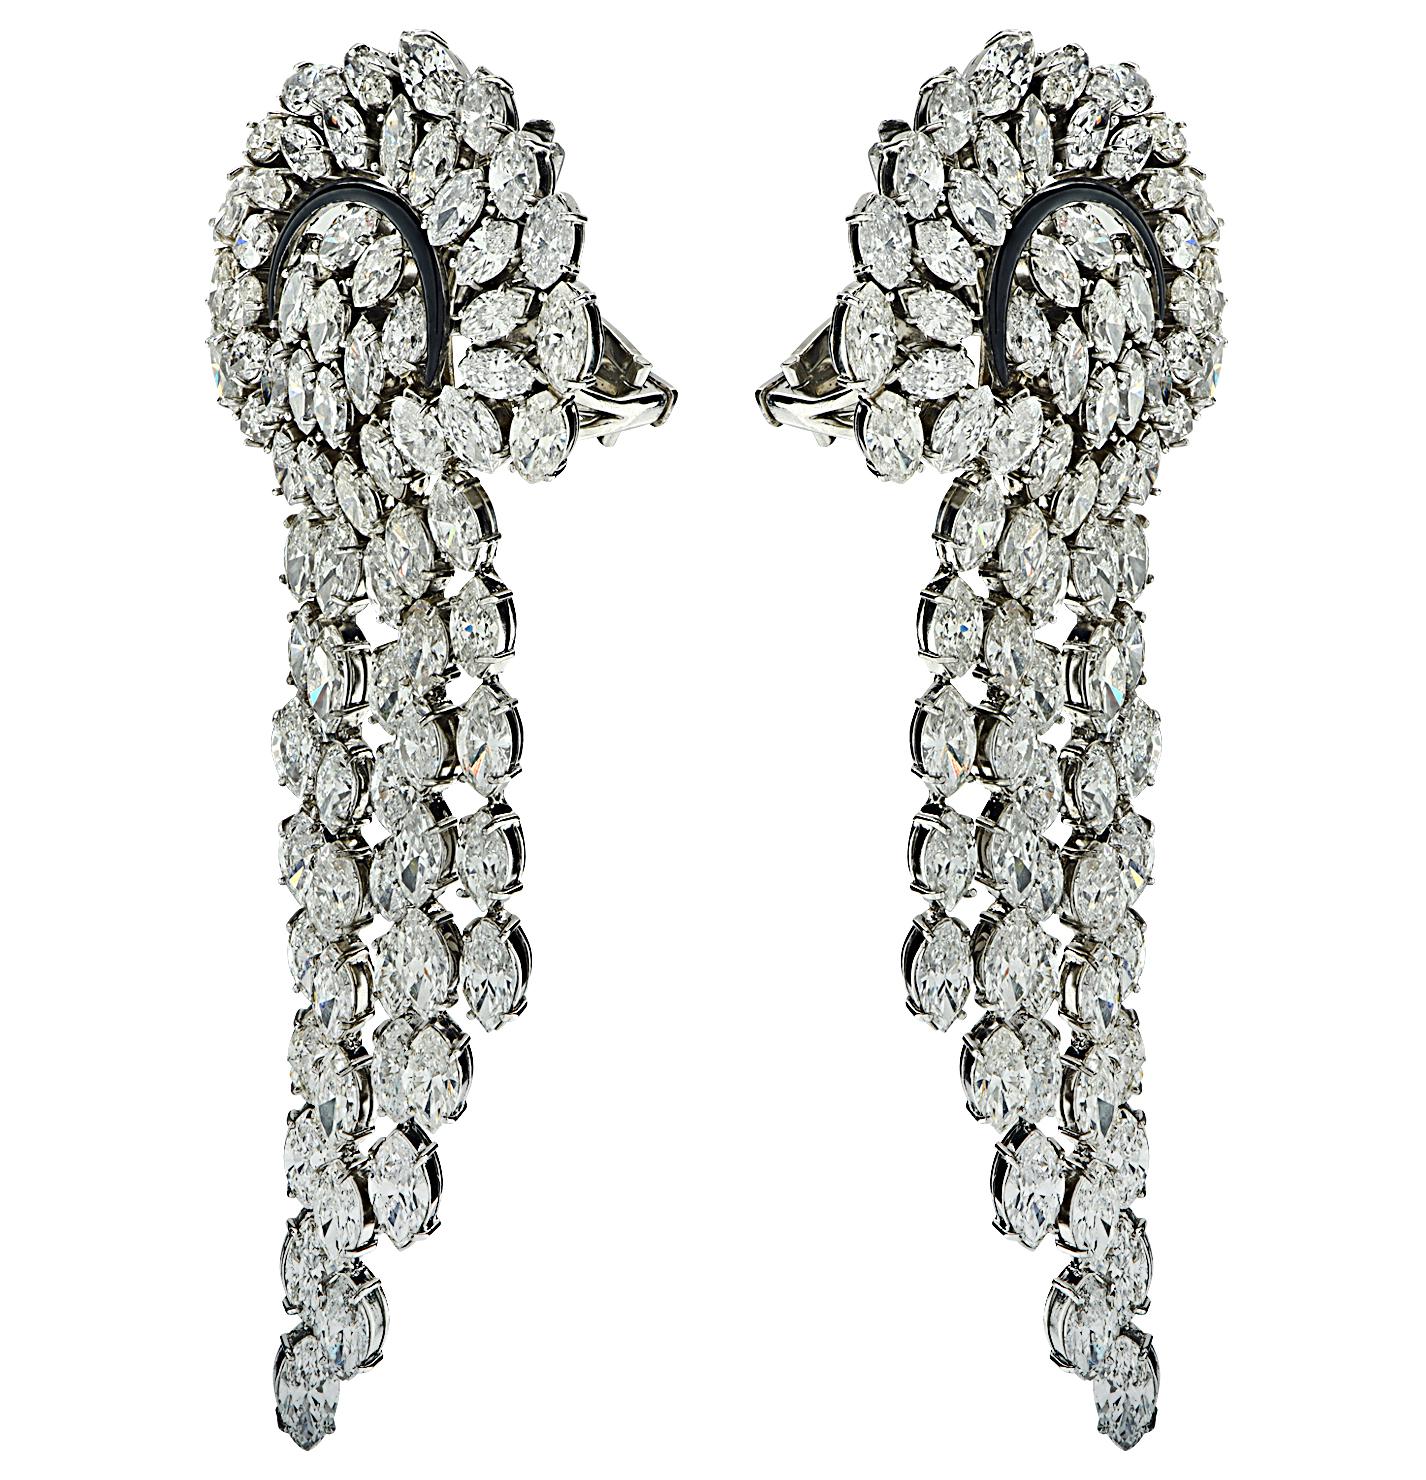 Exquisite Vivid Diamonds chandelier earrings crafted in platinum, featuring 150 marquise diamonds weighing approximately 59.00 carats F-H color, VS-SI clarity. The center of each earring has a subtle black enamel crescent, emulating a crescent moon.